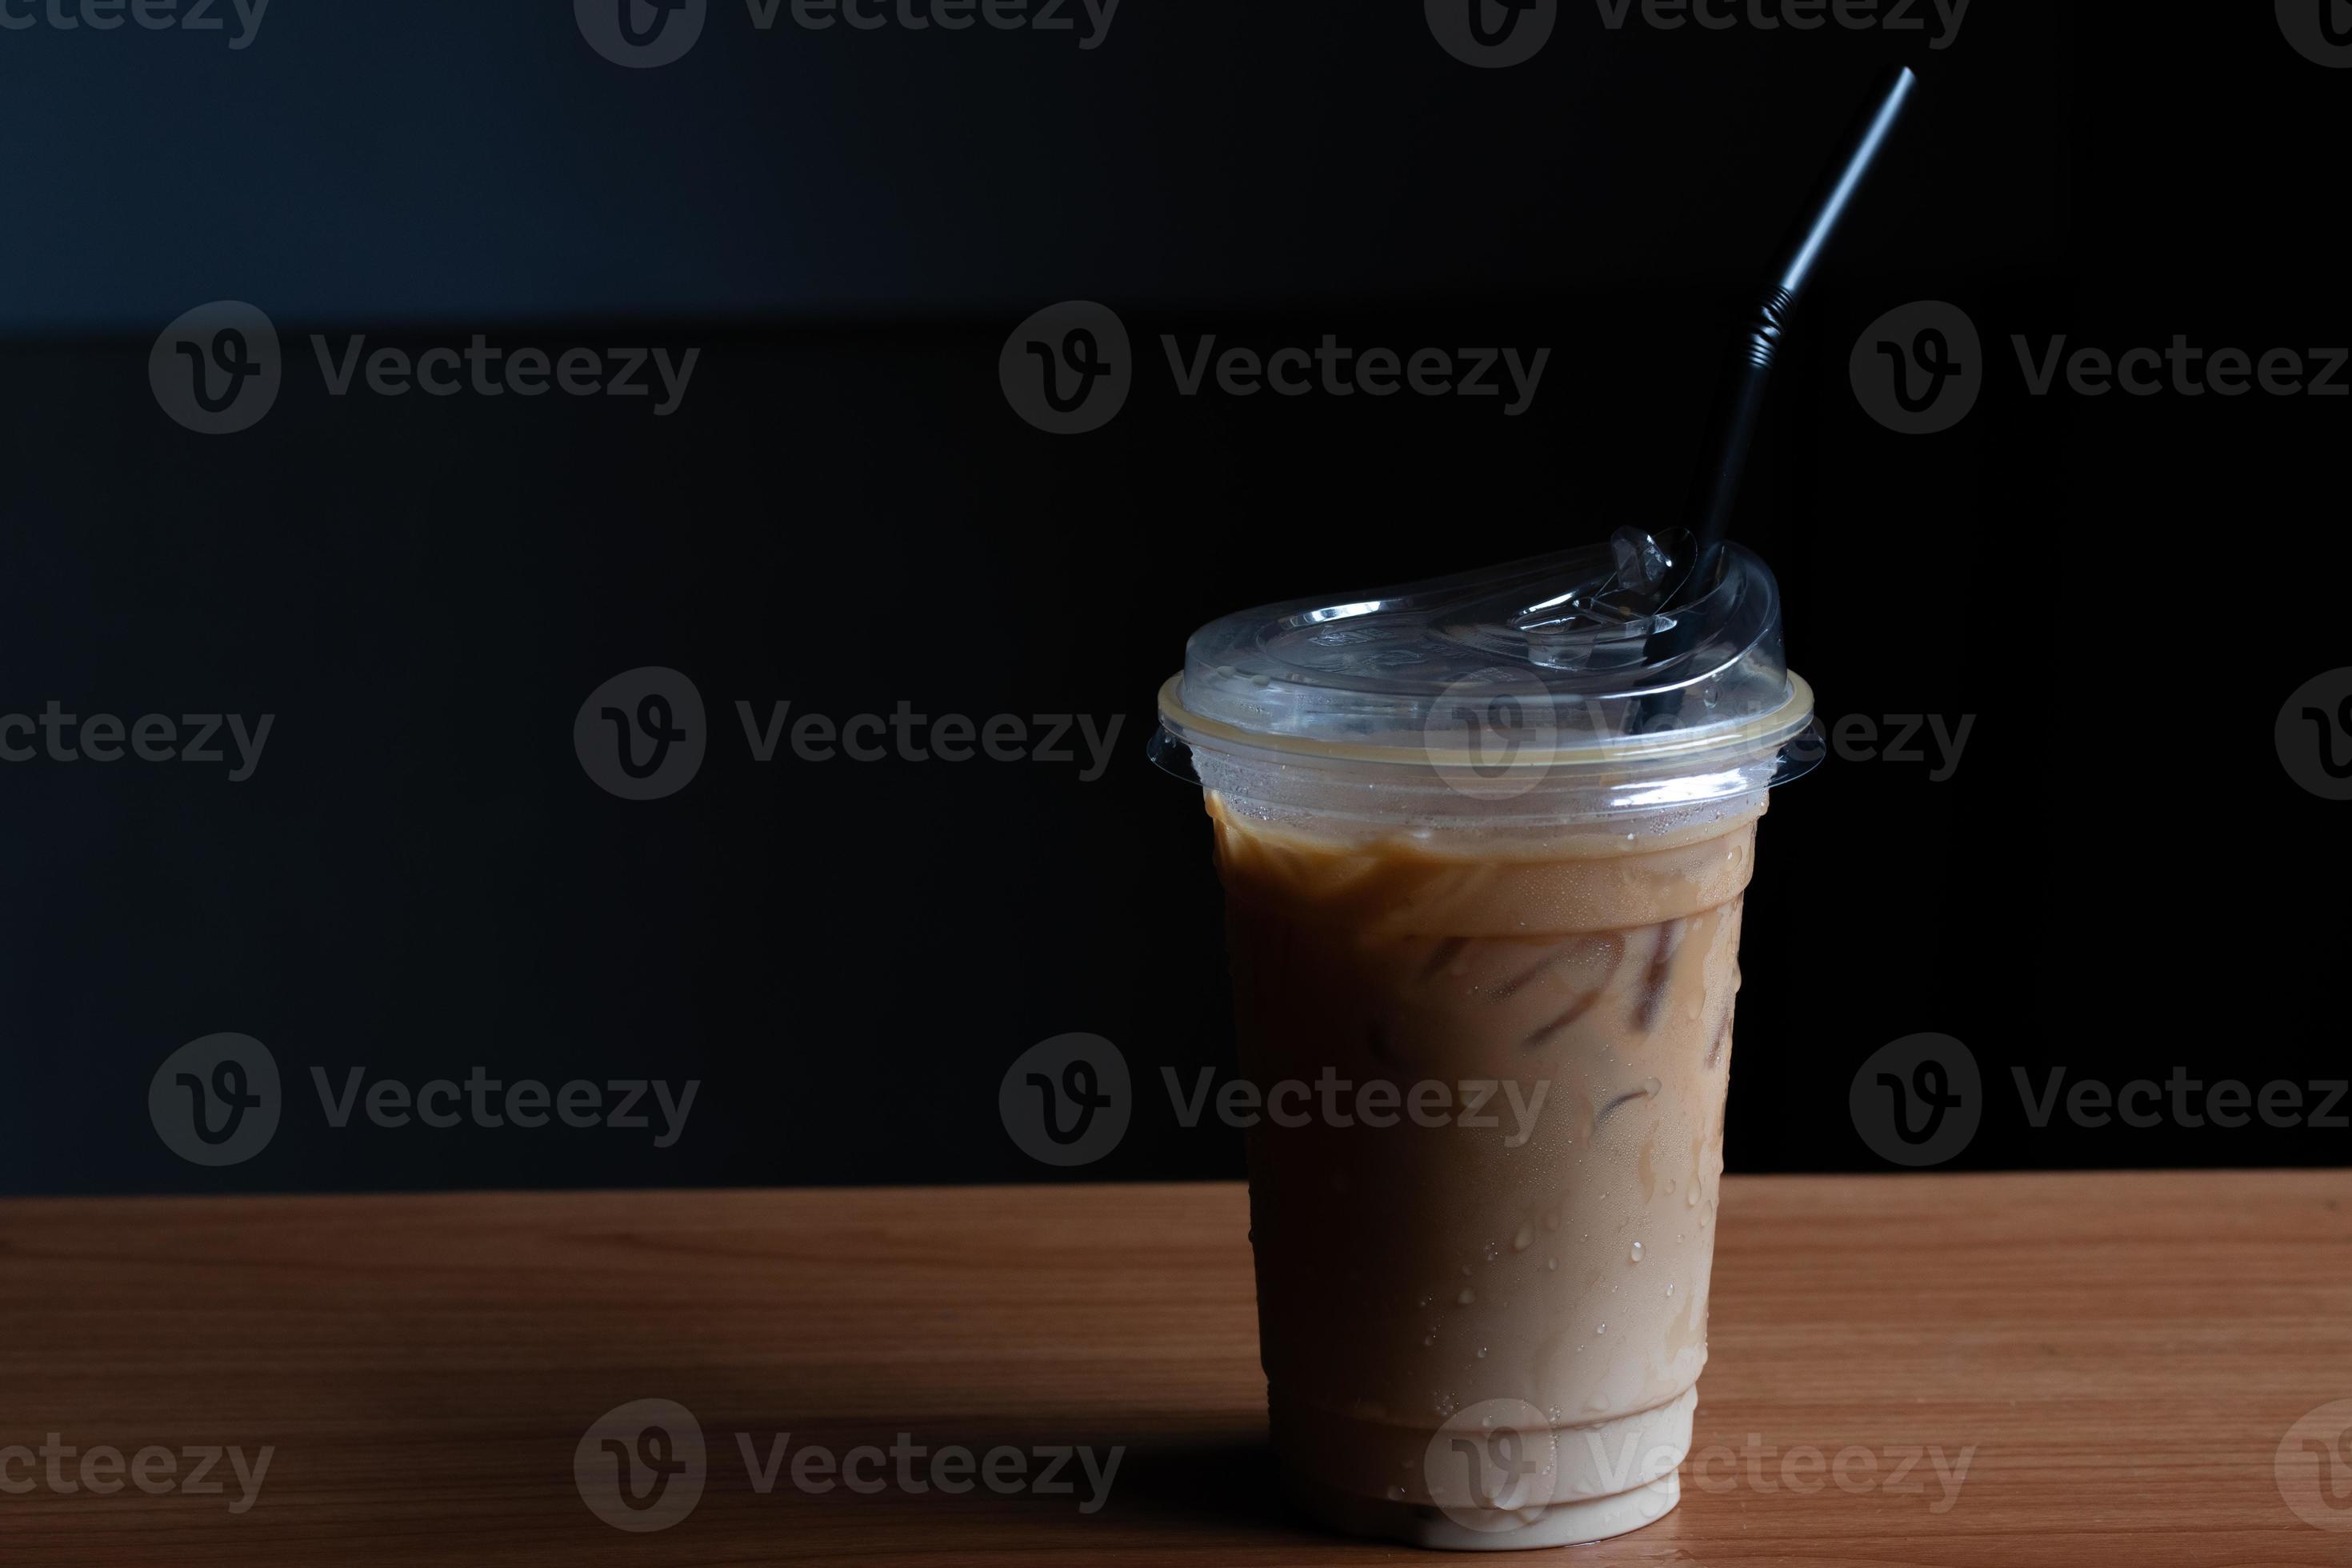 https://static.vecteezy.com/system/resources/previews/021/163/044/large_2x/iced-coffee-in-clear-plastic-cup-photo.jpg